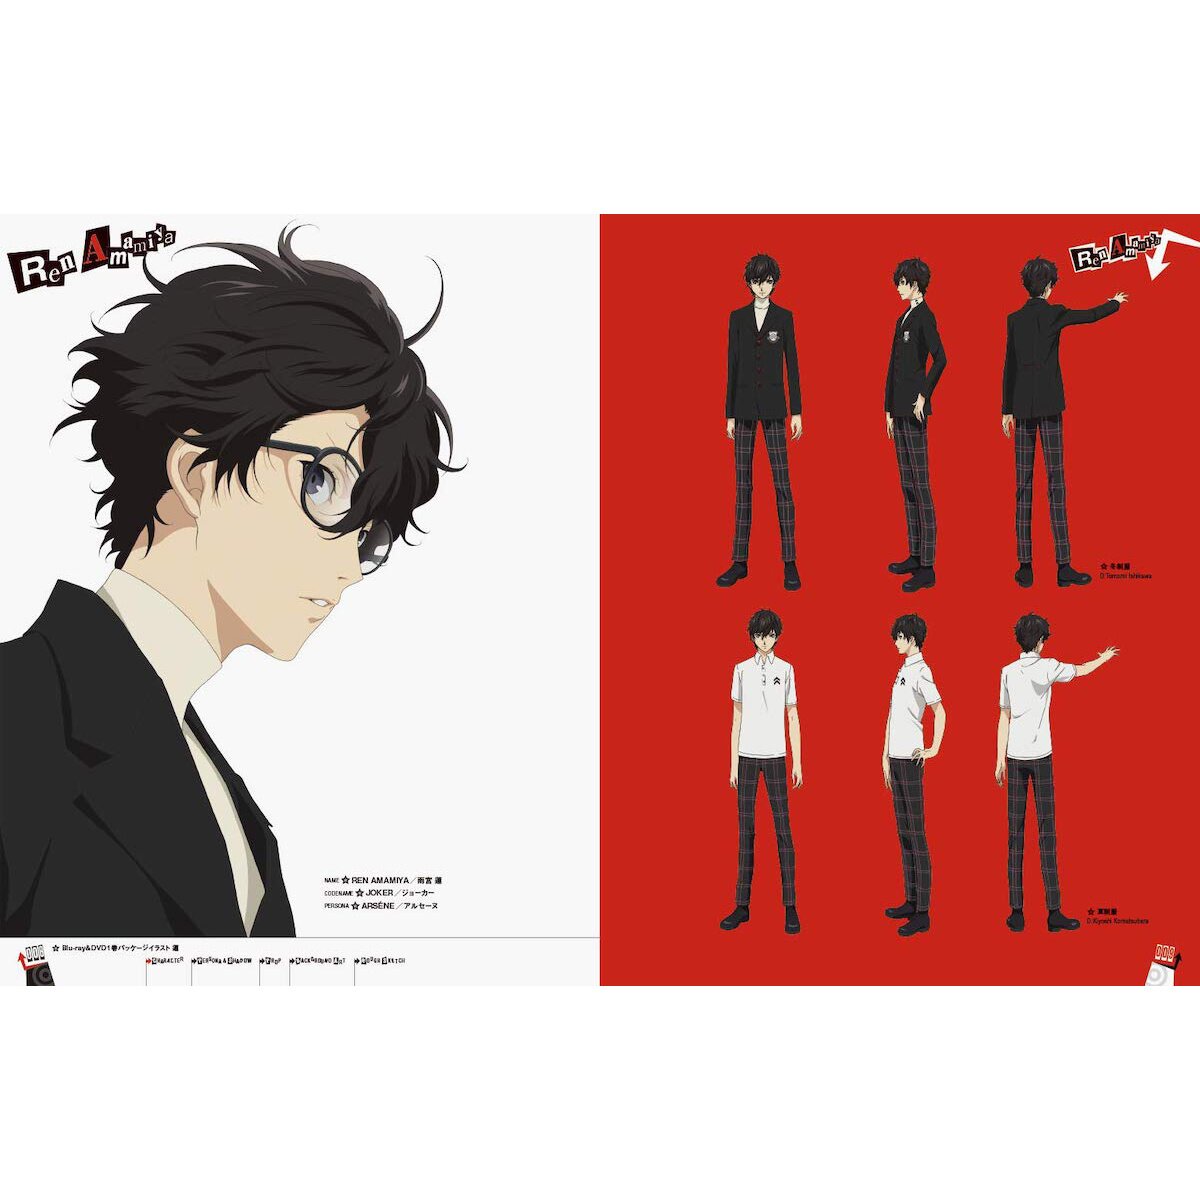 Persona 5 the Animation Characters  Persona 5, Persona, Animated characters